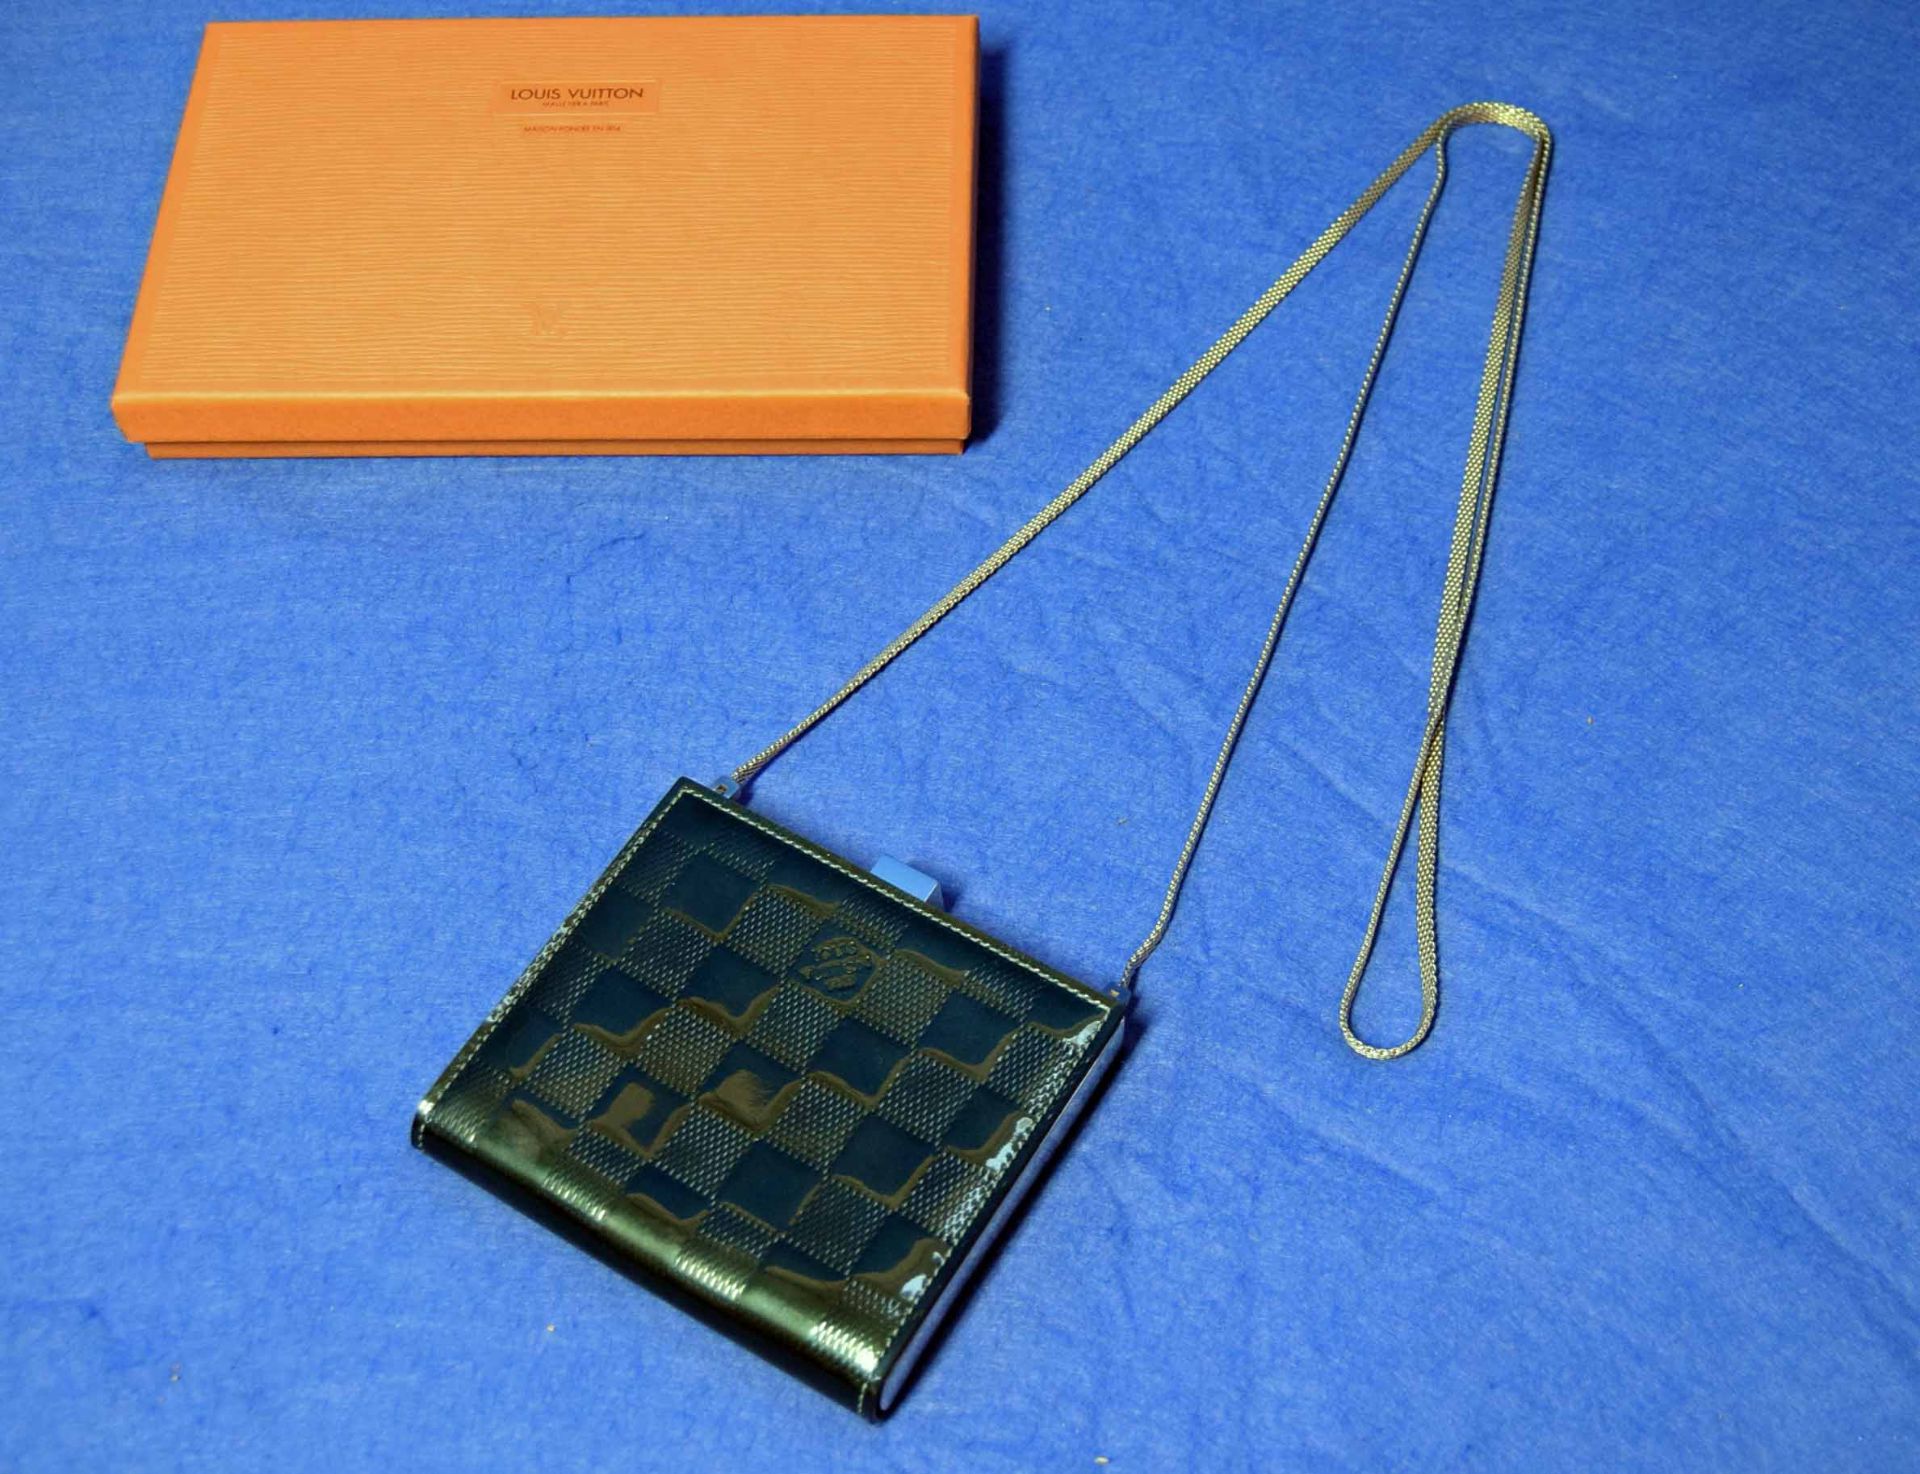 A LOUIS VUITTON Damier Ange Shoulder Bag in Petrol Blue/Green Patent Leather with embossed Logo to - Image 5 of 6